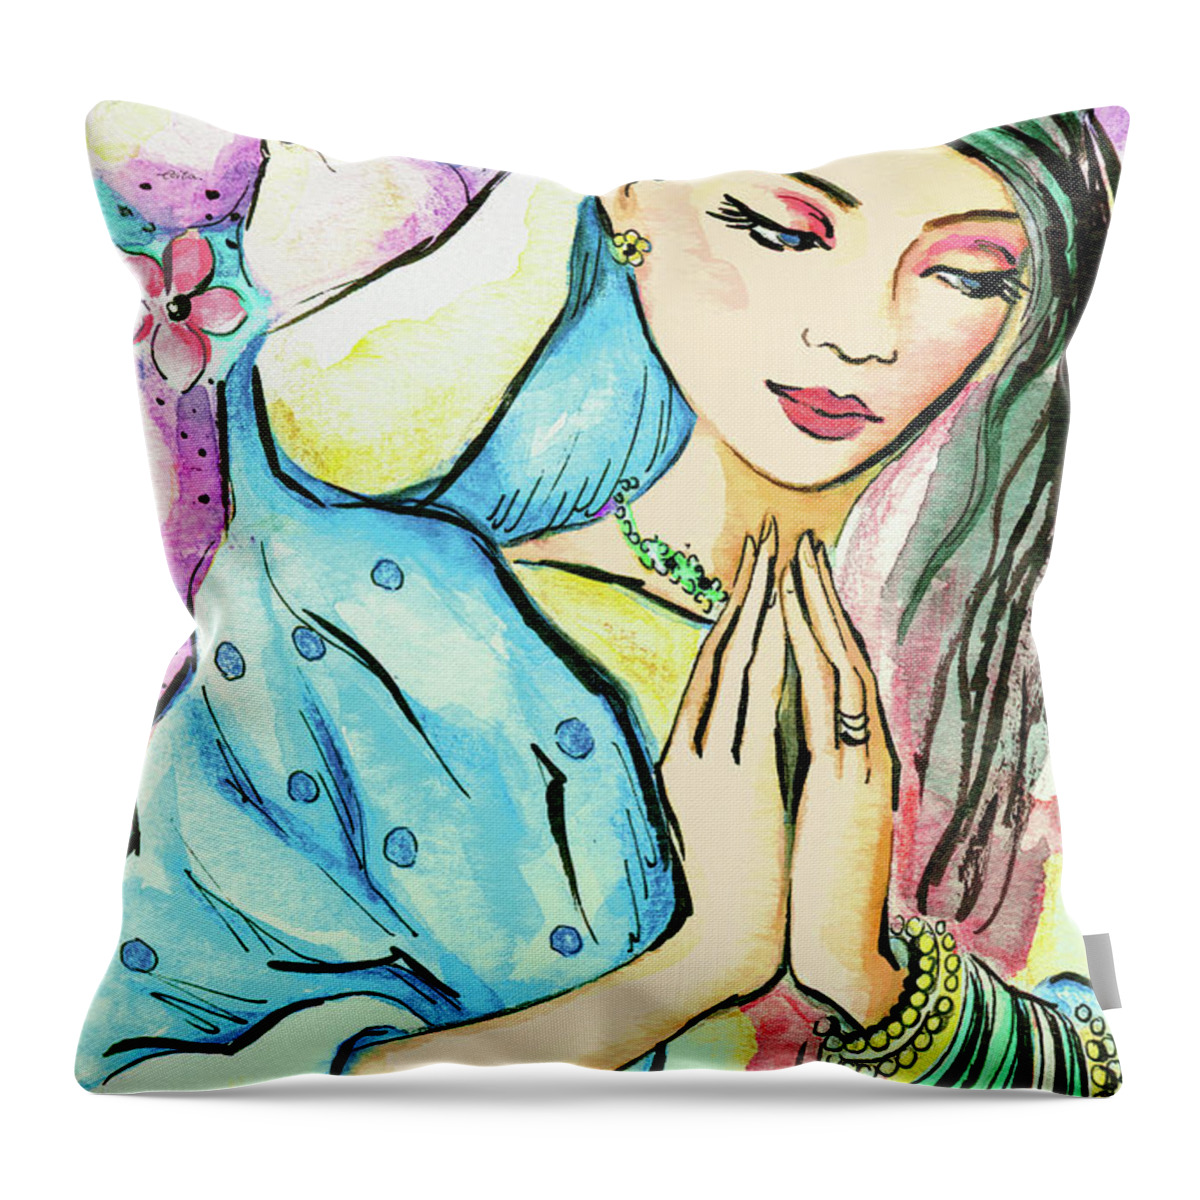 Praying Woman Throw Pillow featuring the painting Little Pray by Eva Campbell